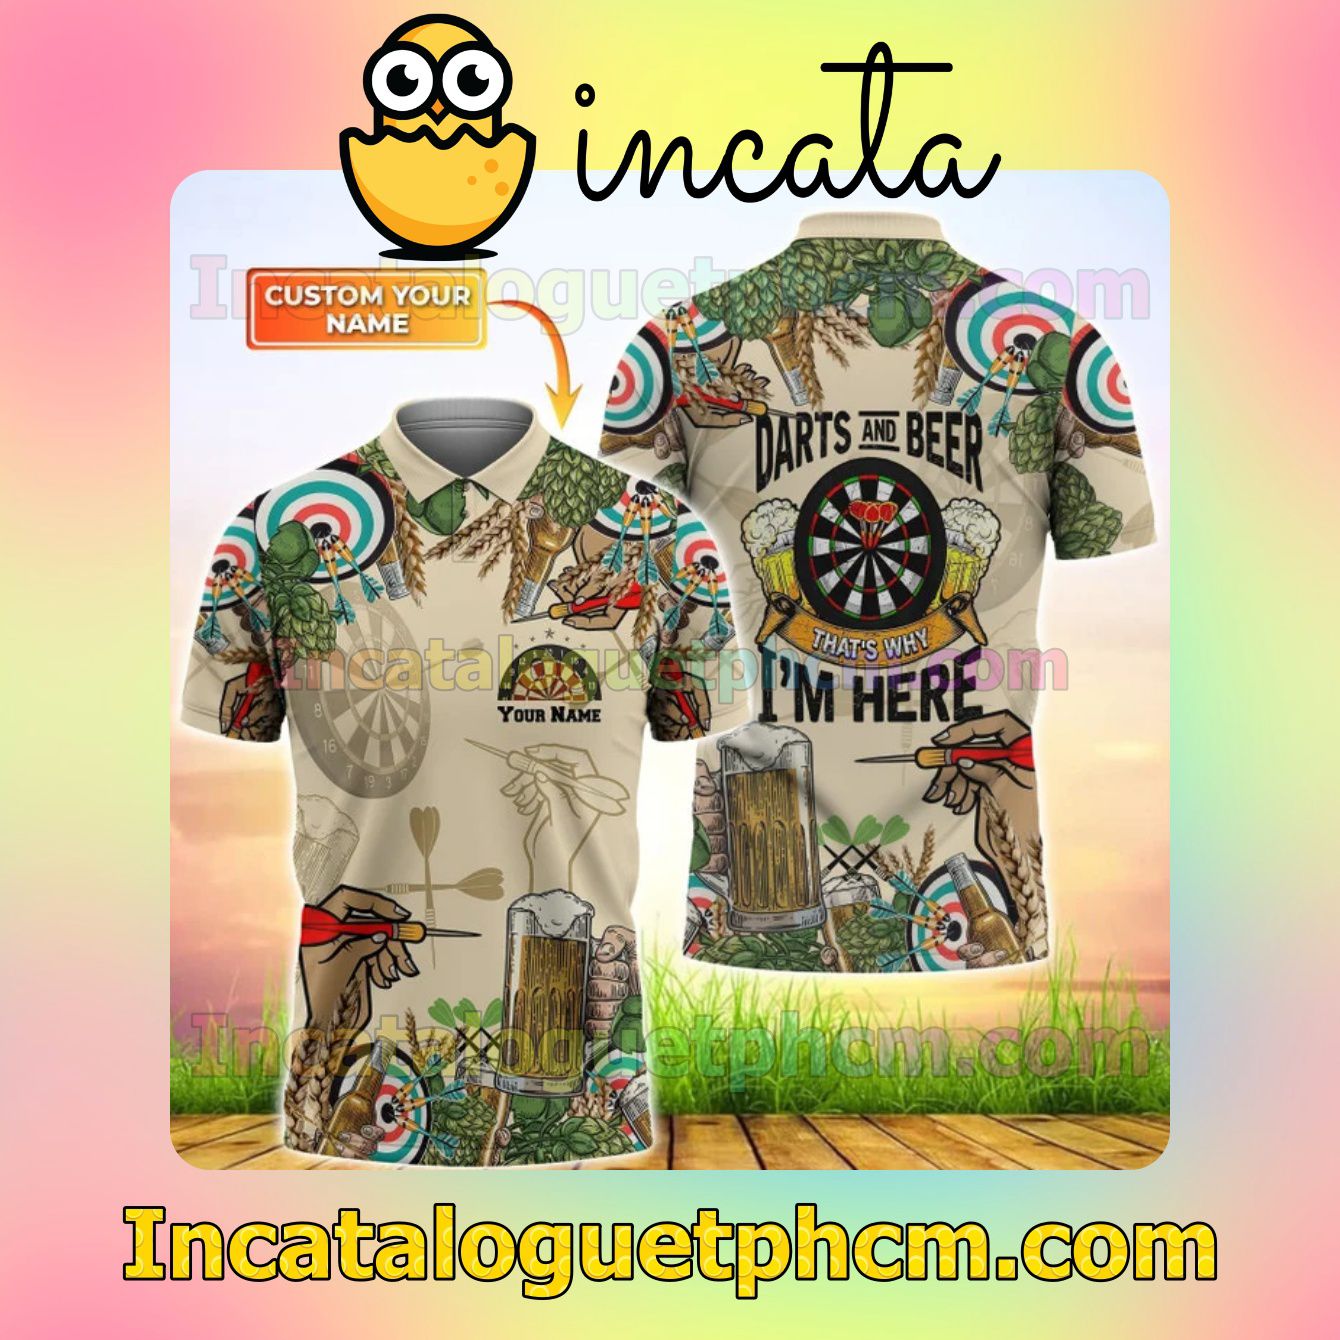 Personalized Darts And Beer That's Why I'm Here Polo Gift For Men Dad